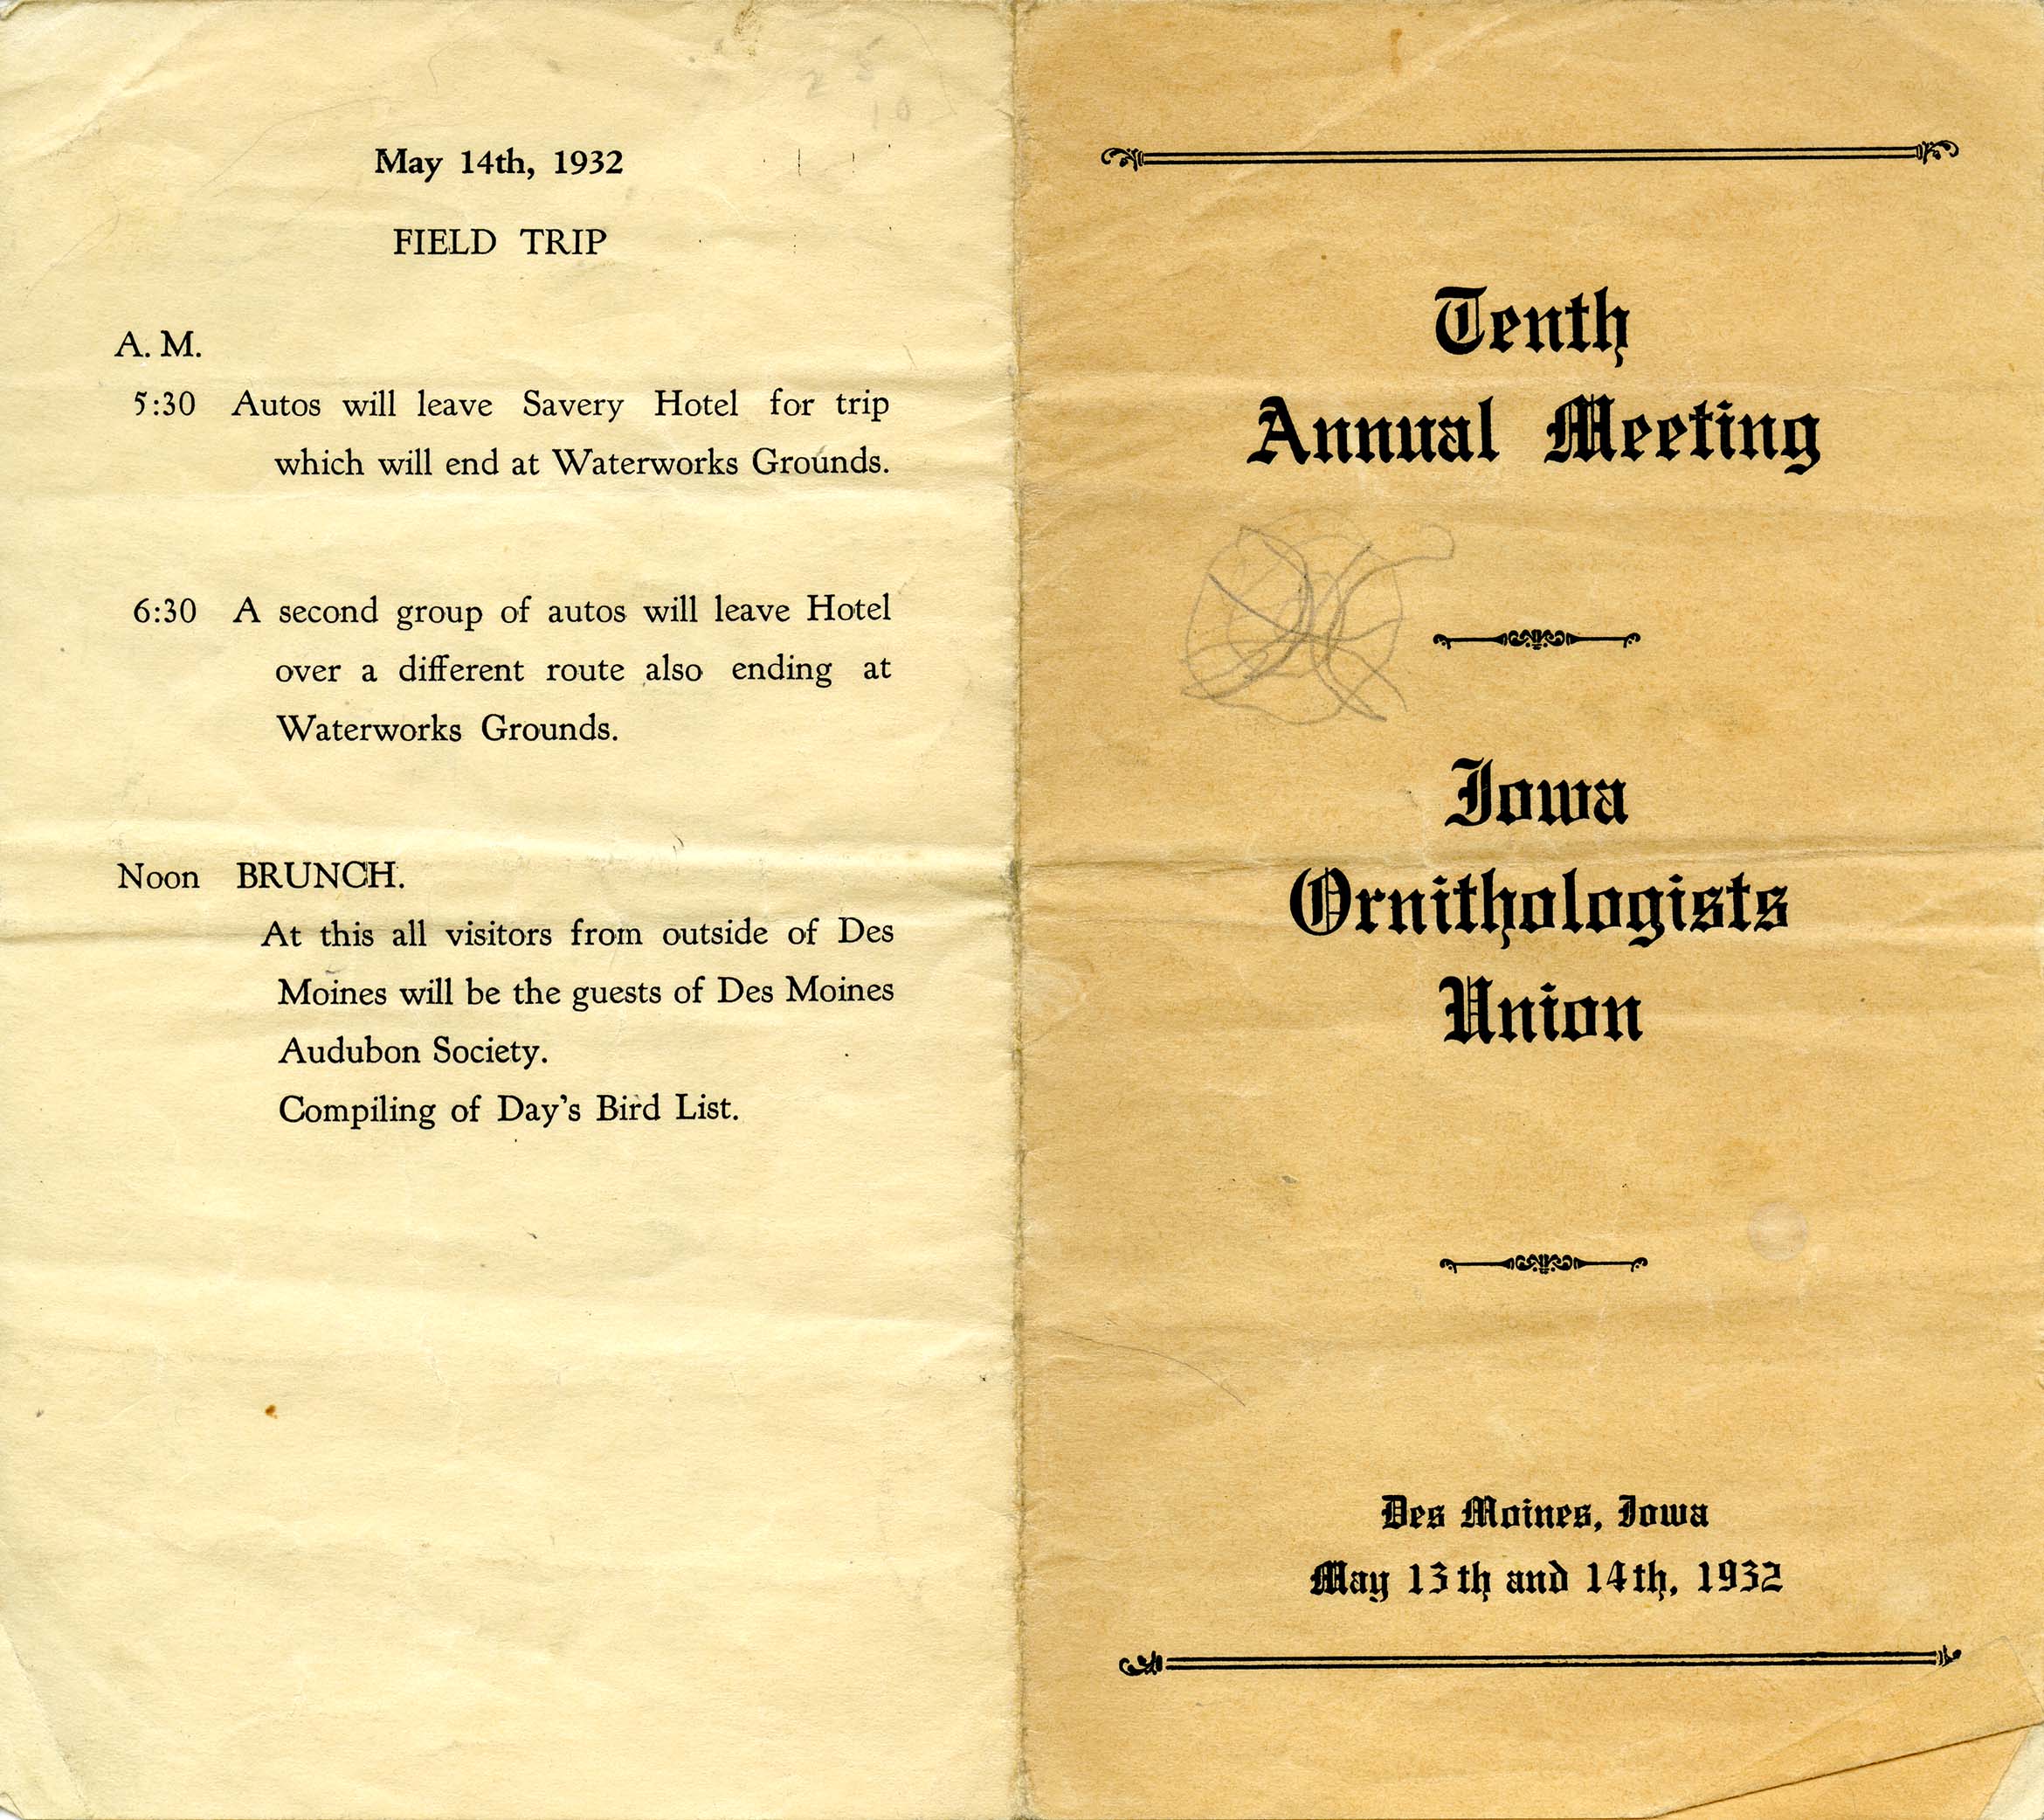 Tenth Annual Meeting Iowa Ornithologists' Union, May 13-14, 1952